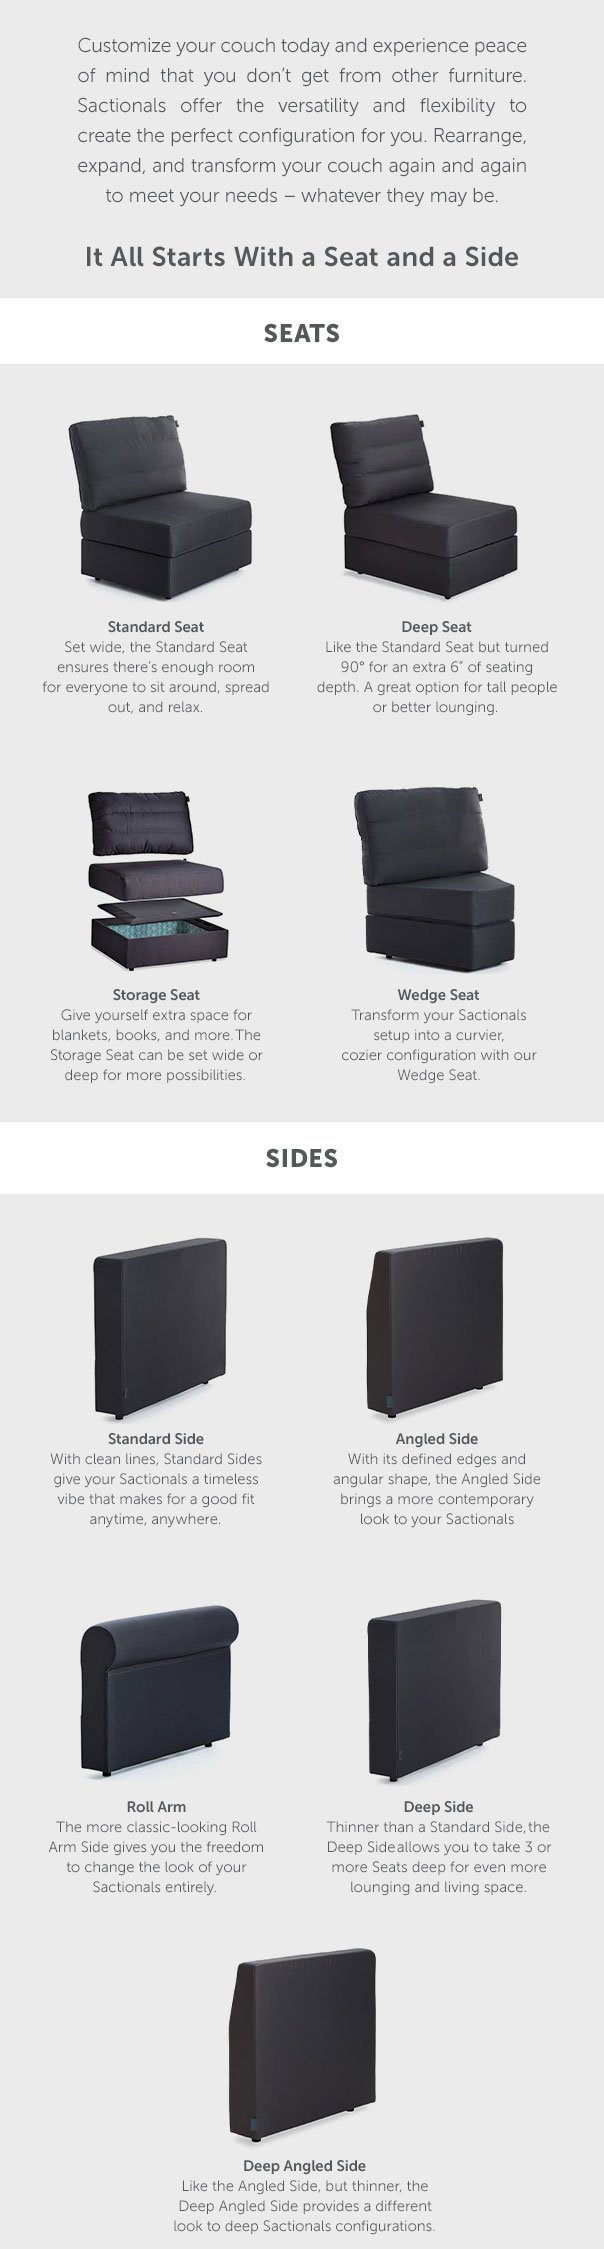 Customize your couch today and experience peace of mind that you don't get from other furniture. Sactionals offer the versatility and flexibility to create the perfect configuration for you. Rearrange, expand, and transform your couch again and again to meet your needs - whatever they may be.